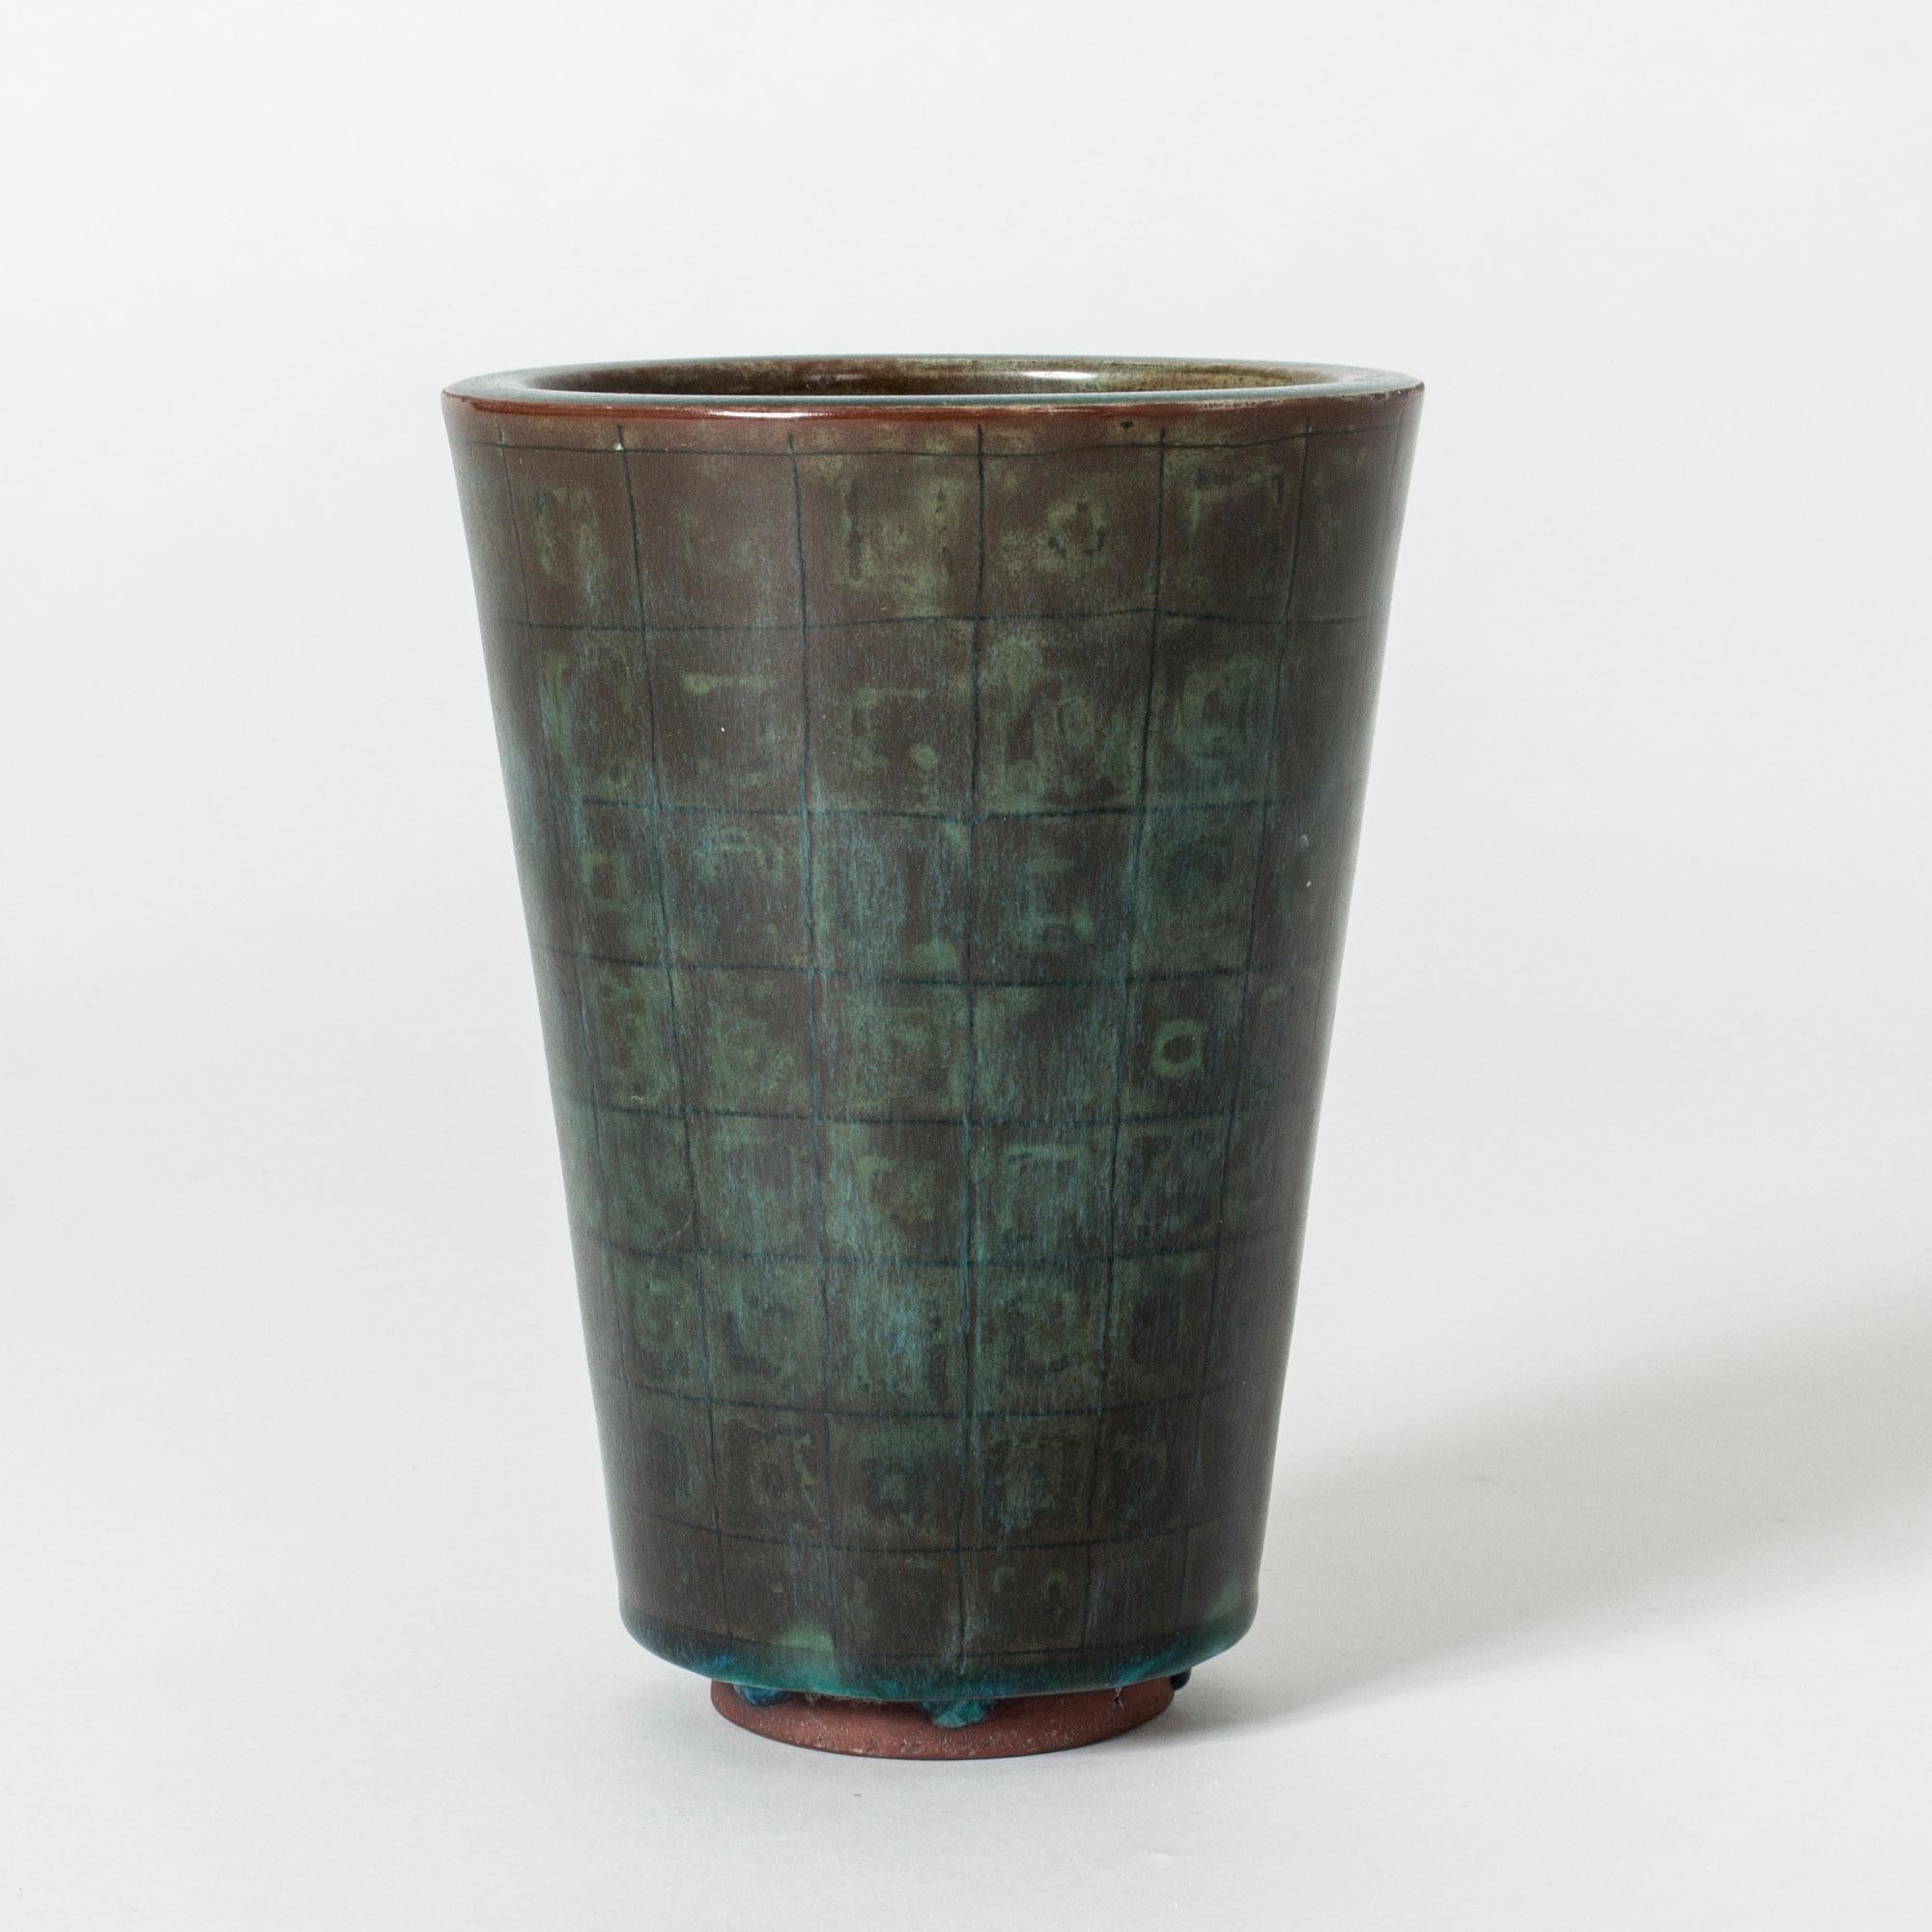 Simple yet striking “Farsta” vase by Wilhelm Kåge with clean lines and a subtle checkered pattern in the dark, patinated copper colored glaze.

“Farsta” stoneware is recognized as being the best and most exclusive that has come out of Swedish arts